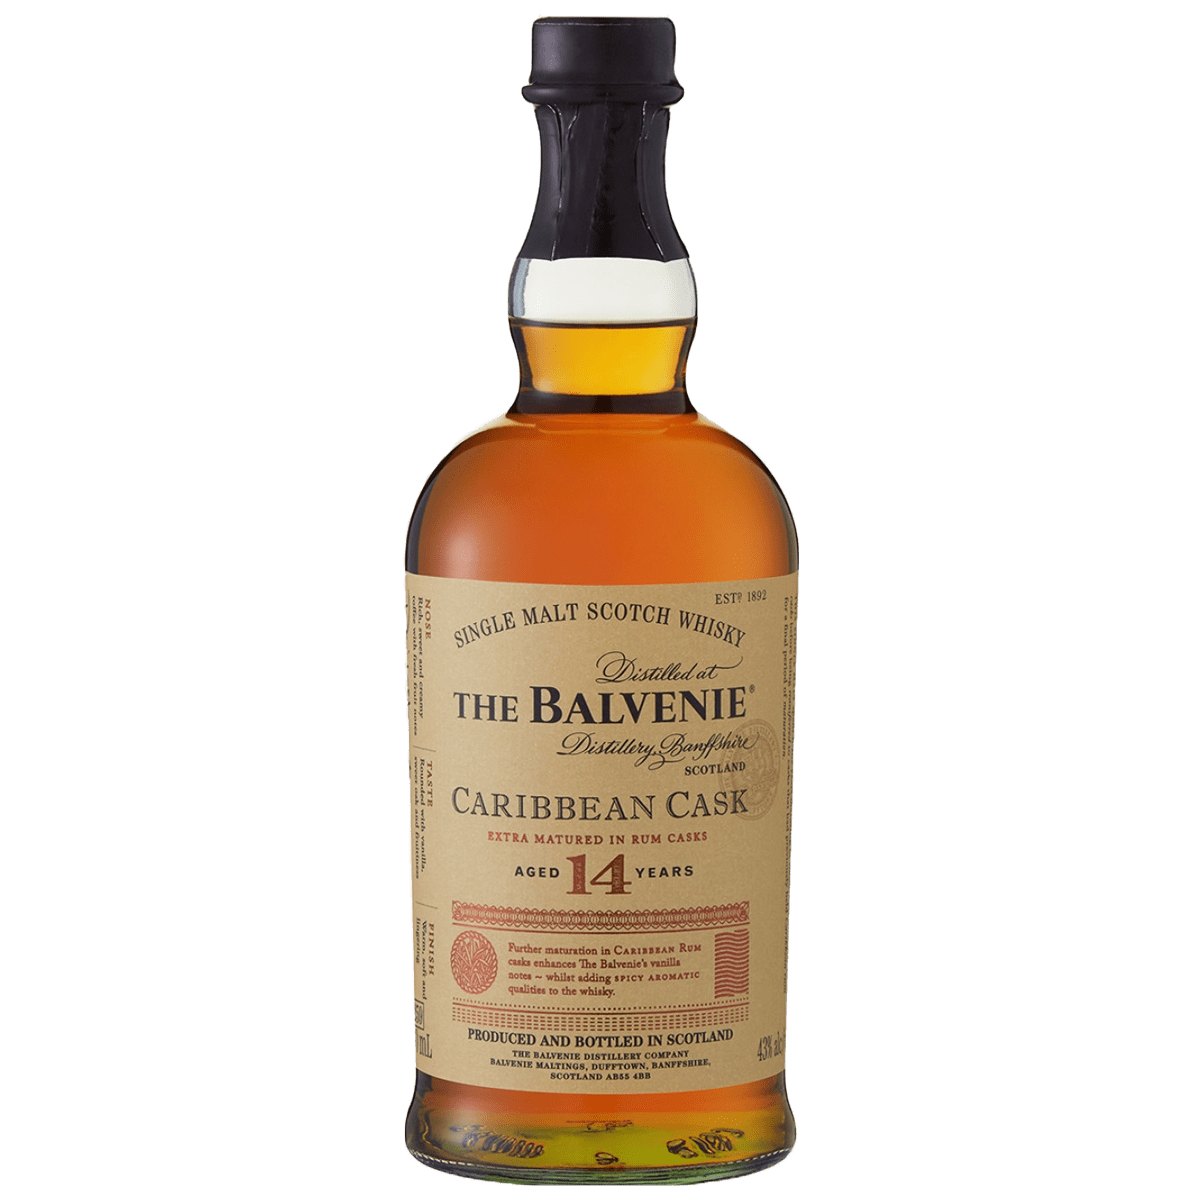 The Balvenie Caribbean Cask Aged 14 Years: Enjoy Doorstep Delivery